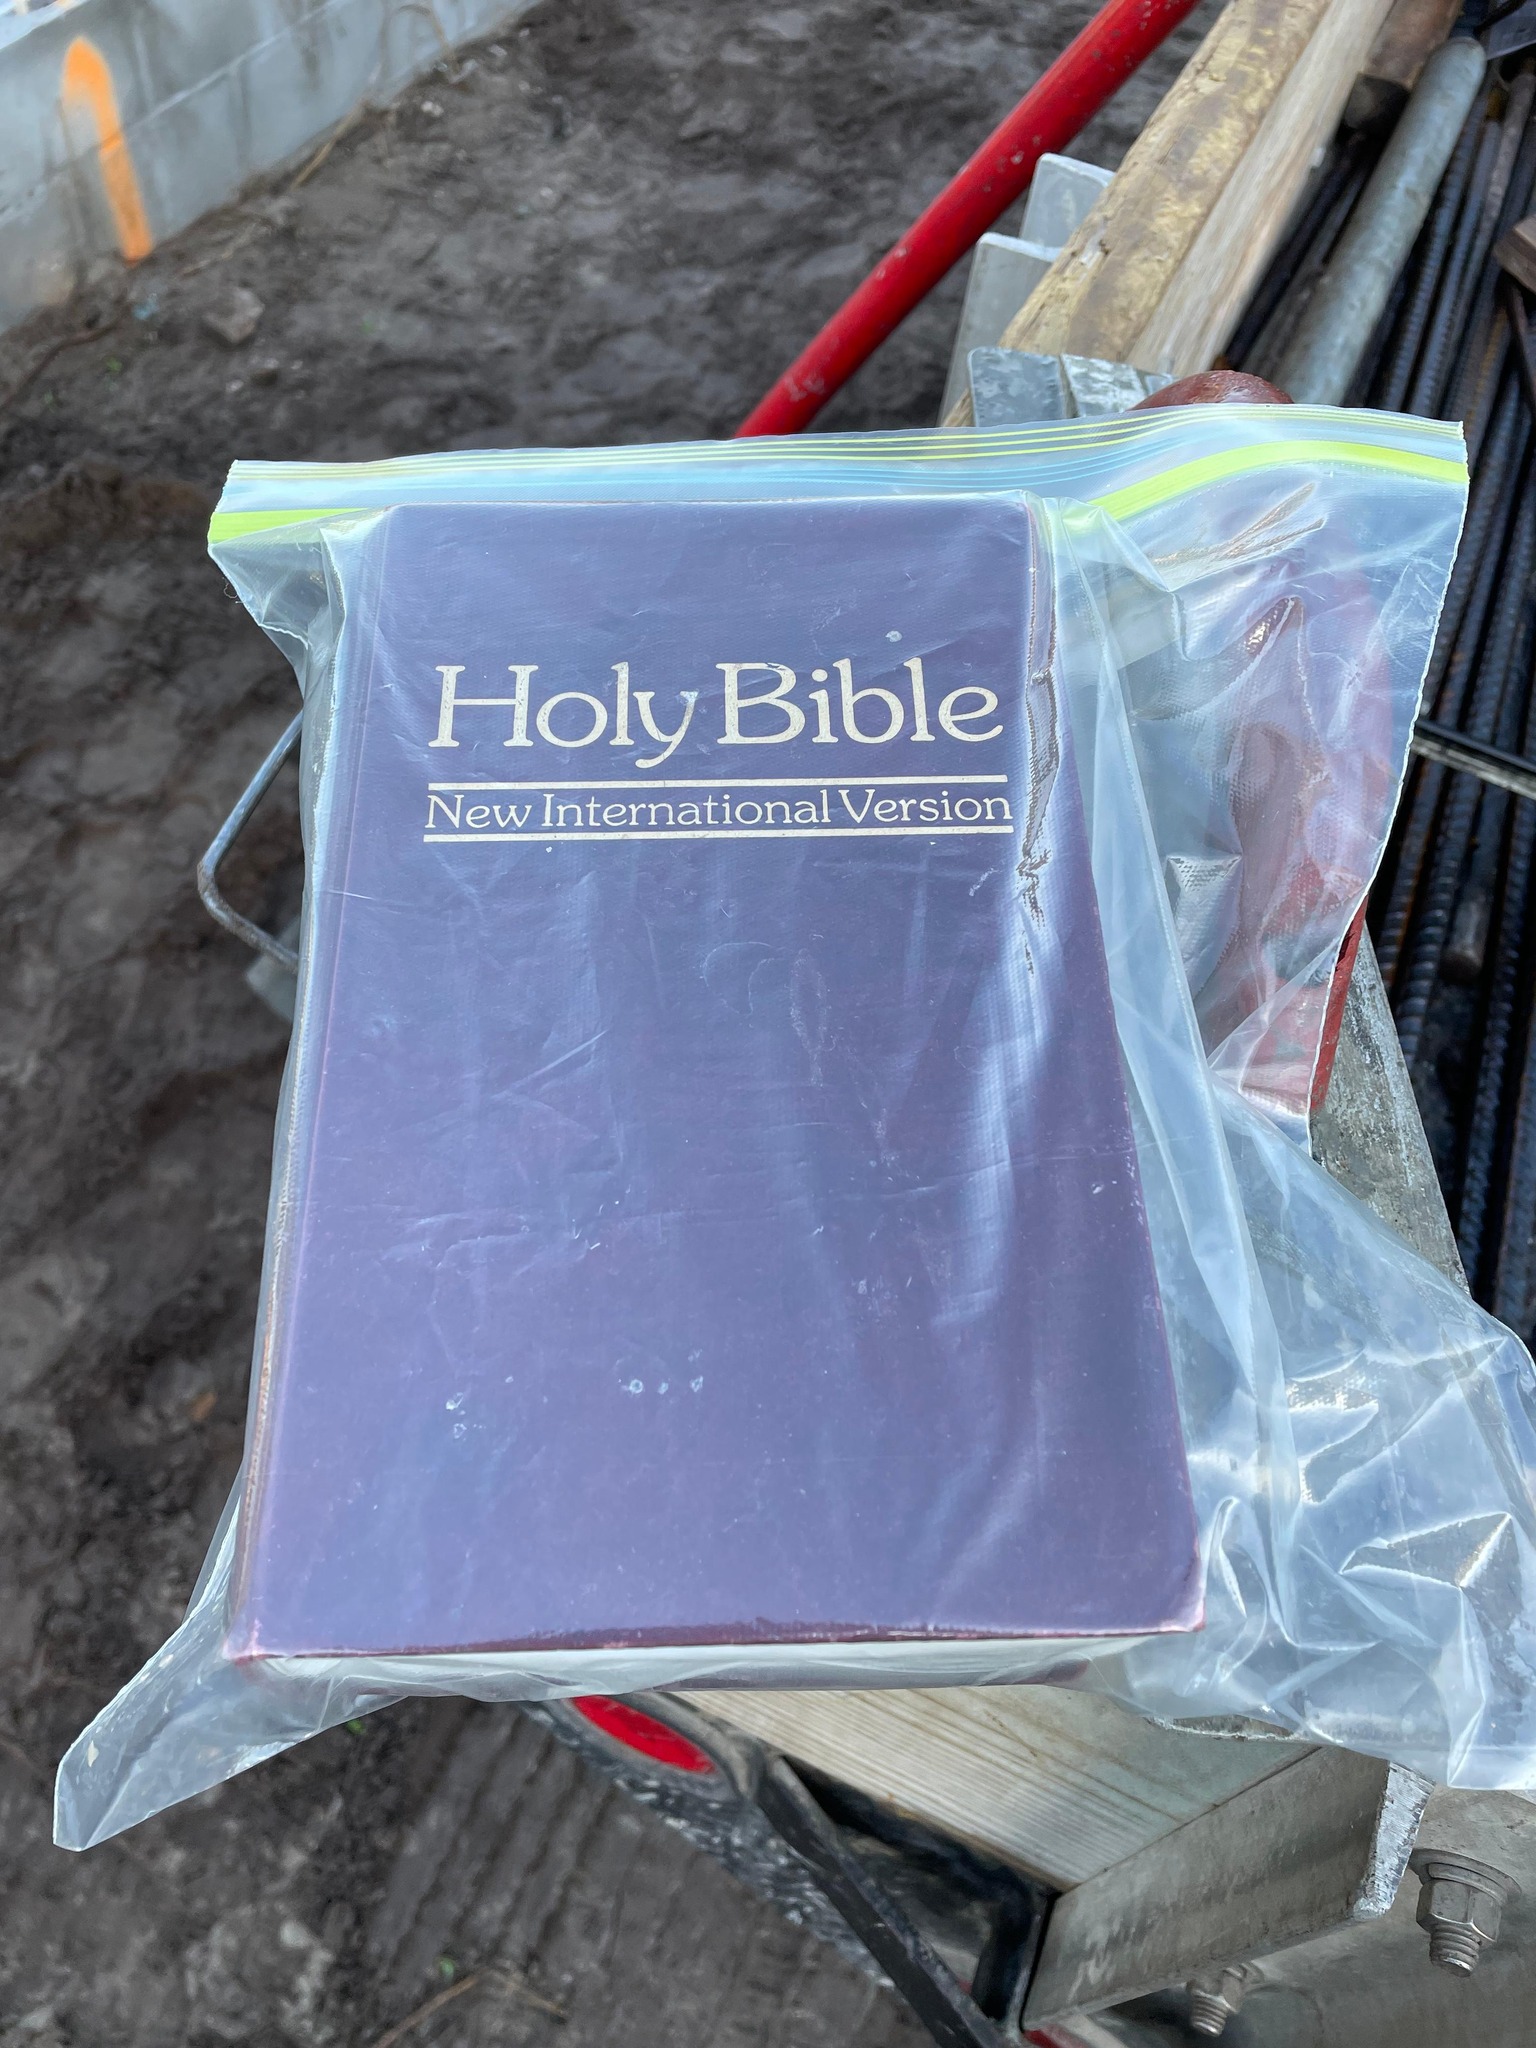 Habitat for Humanity Hosts a “Bible Ceremony” for their 2022 Faith Build Home